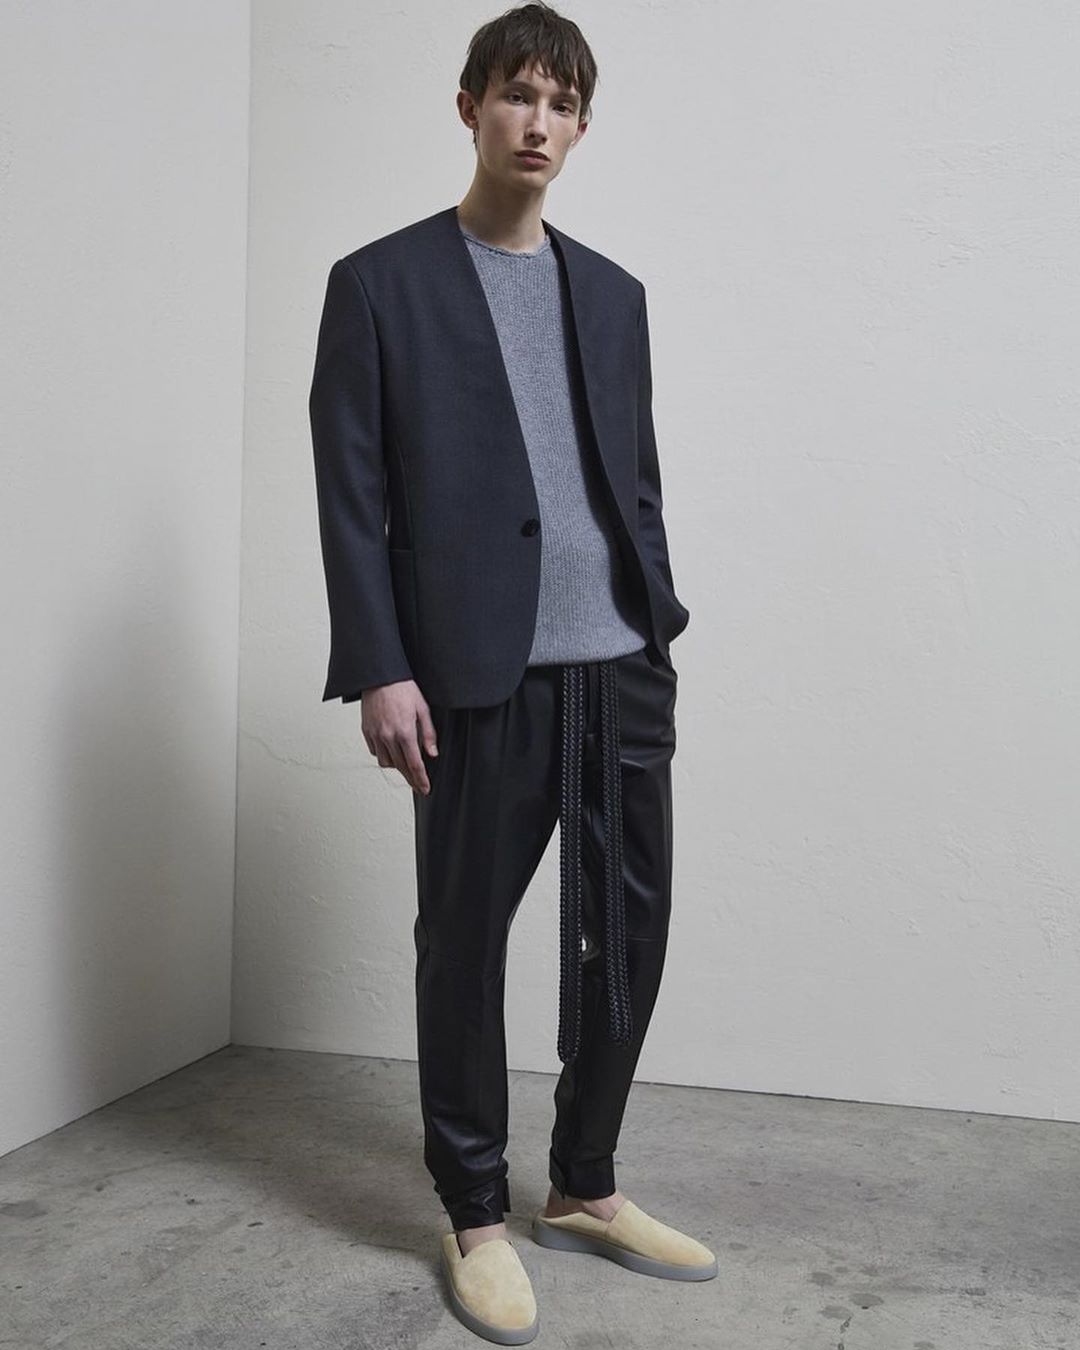 PFW: Fear of God x Zegna Autumn/Winter 2020 Collection – PAUSE Online ...